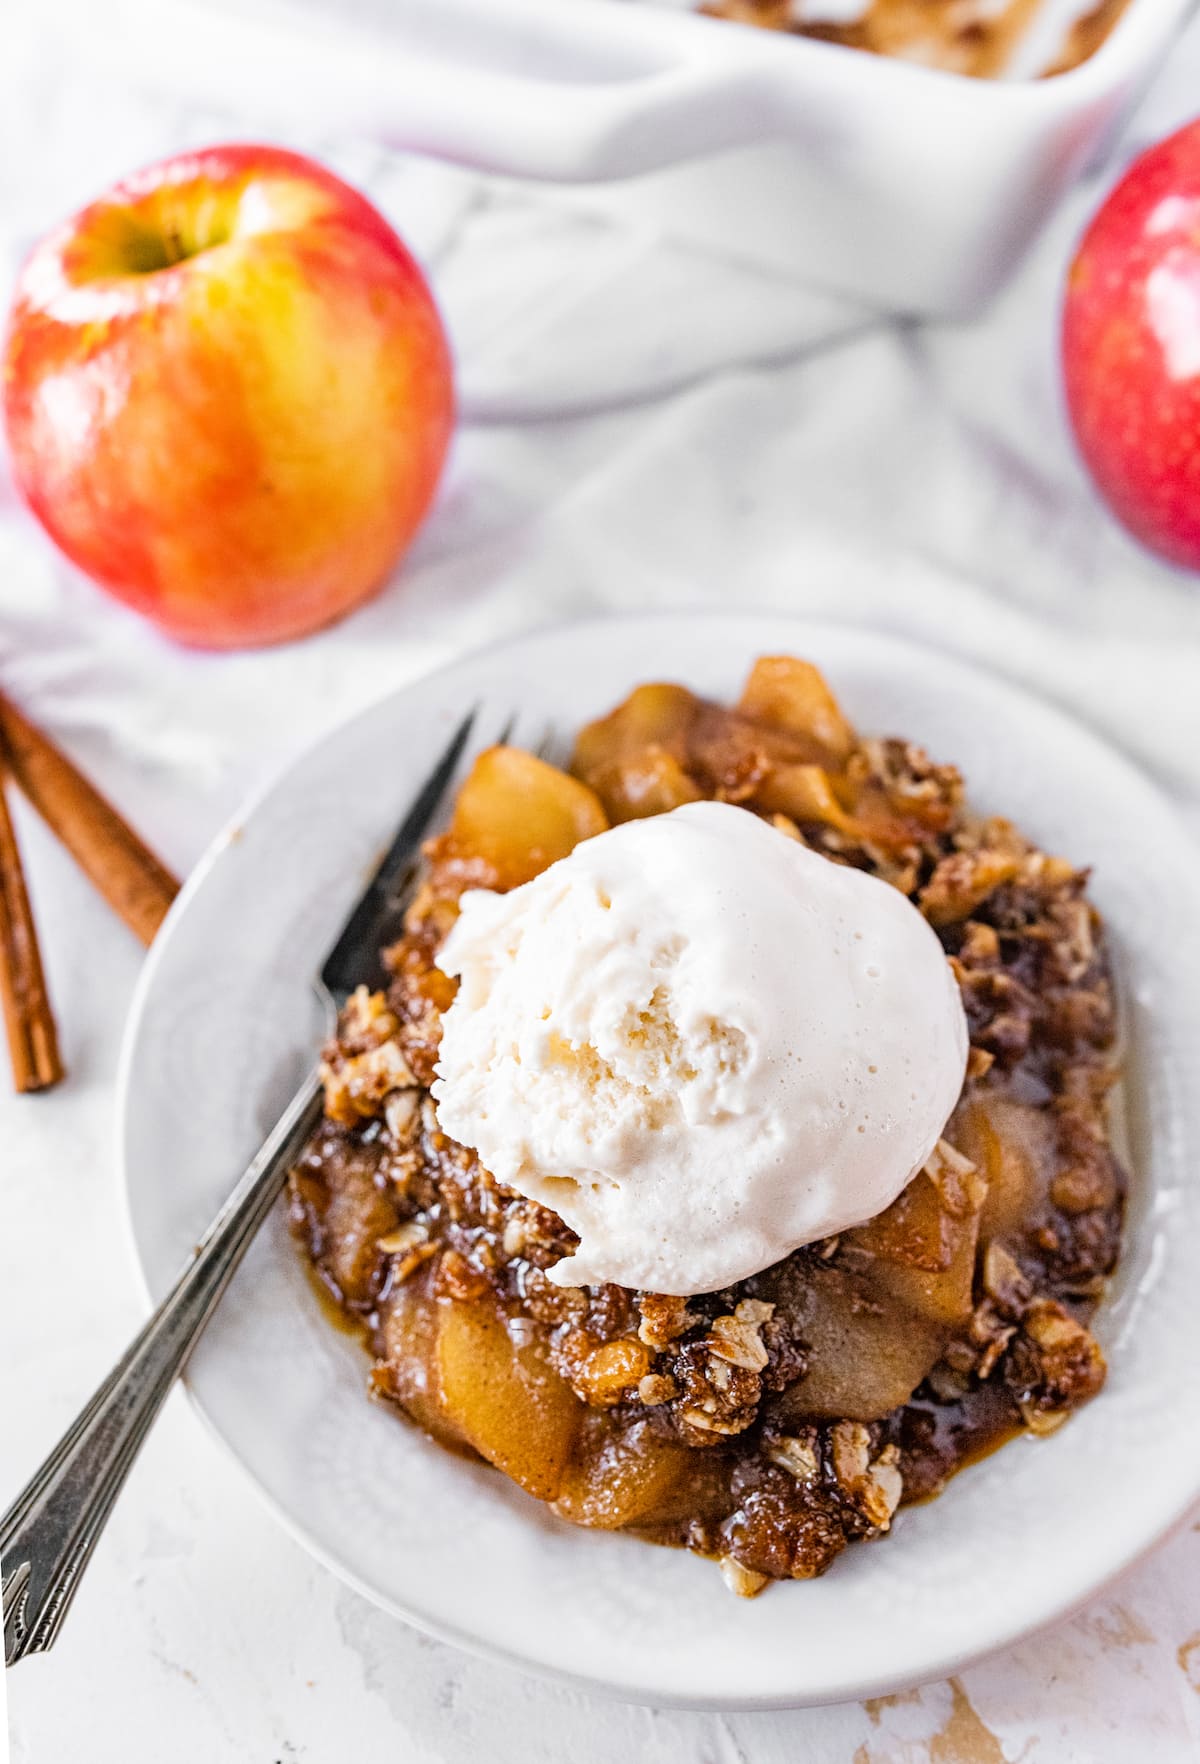 A serving of apple crisp topped with ice cream.